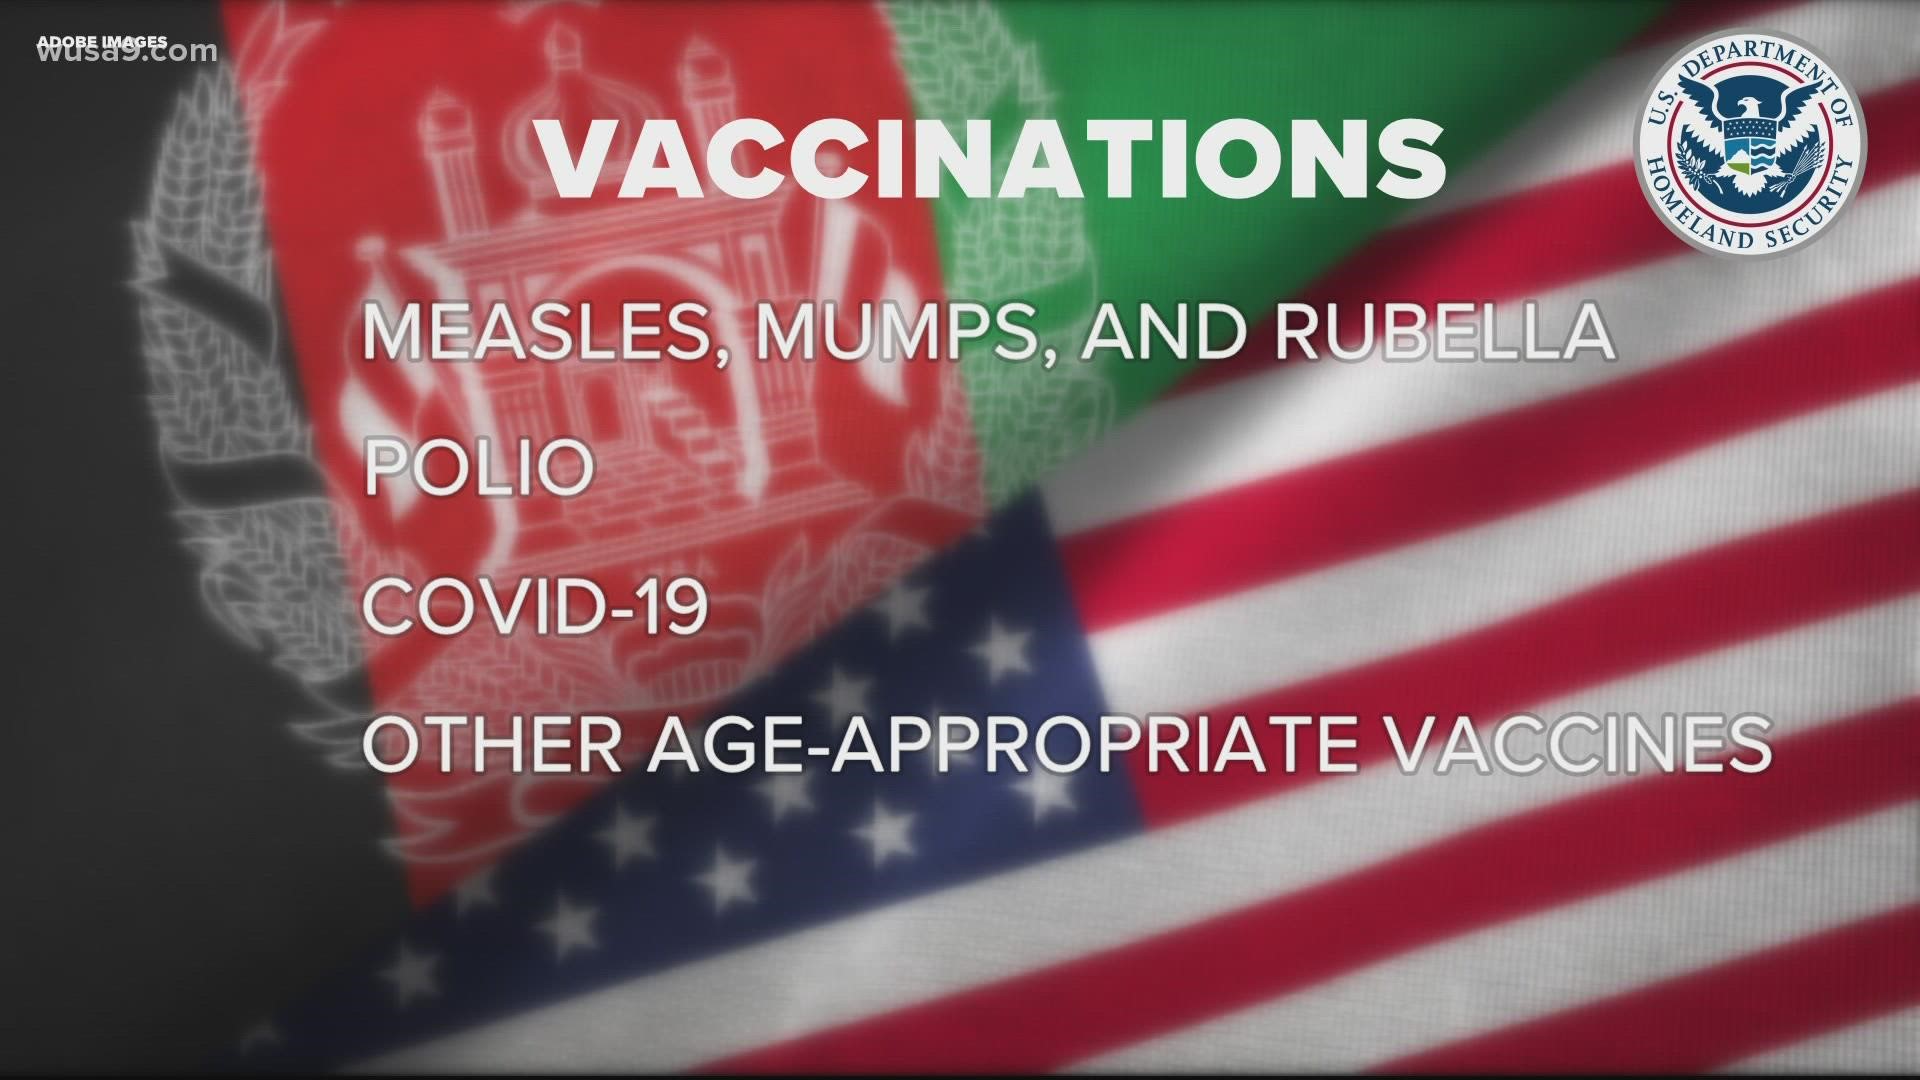 We verified what vaccinations are required for Afghan refugees resettling in the United States.